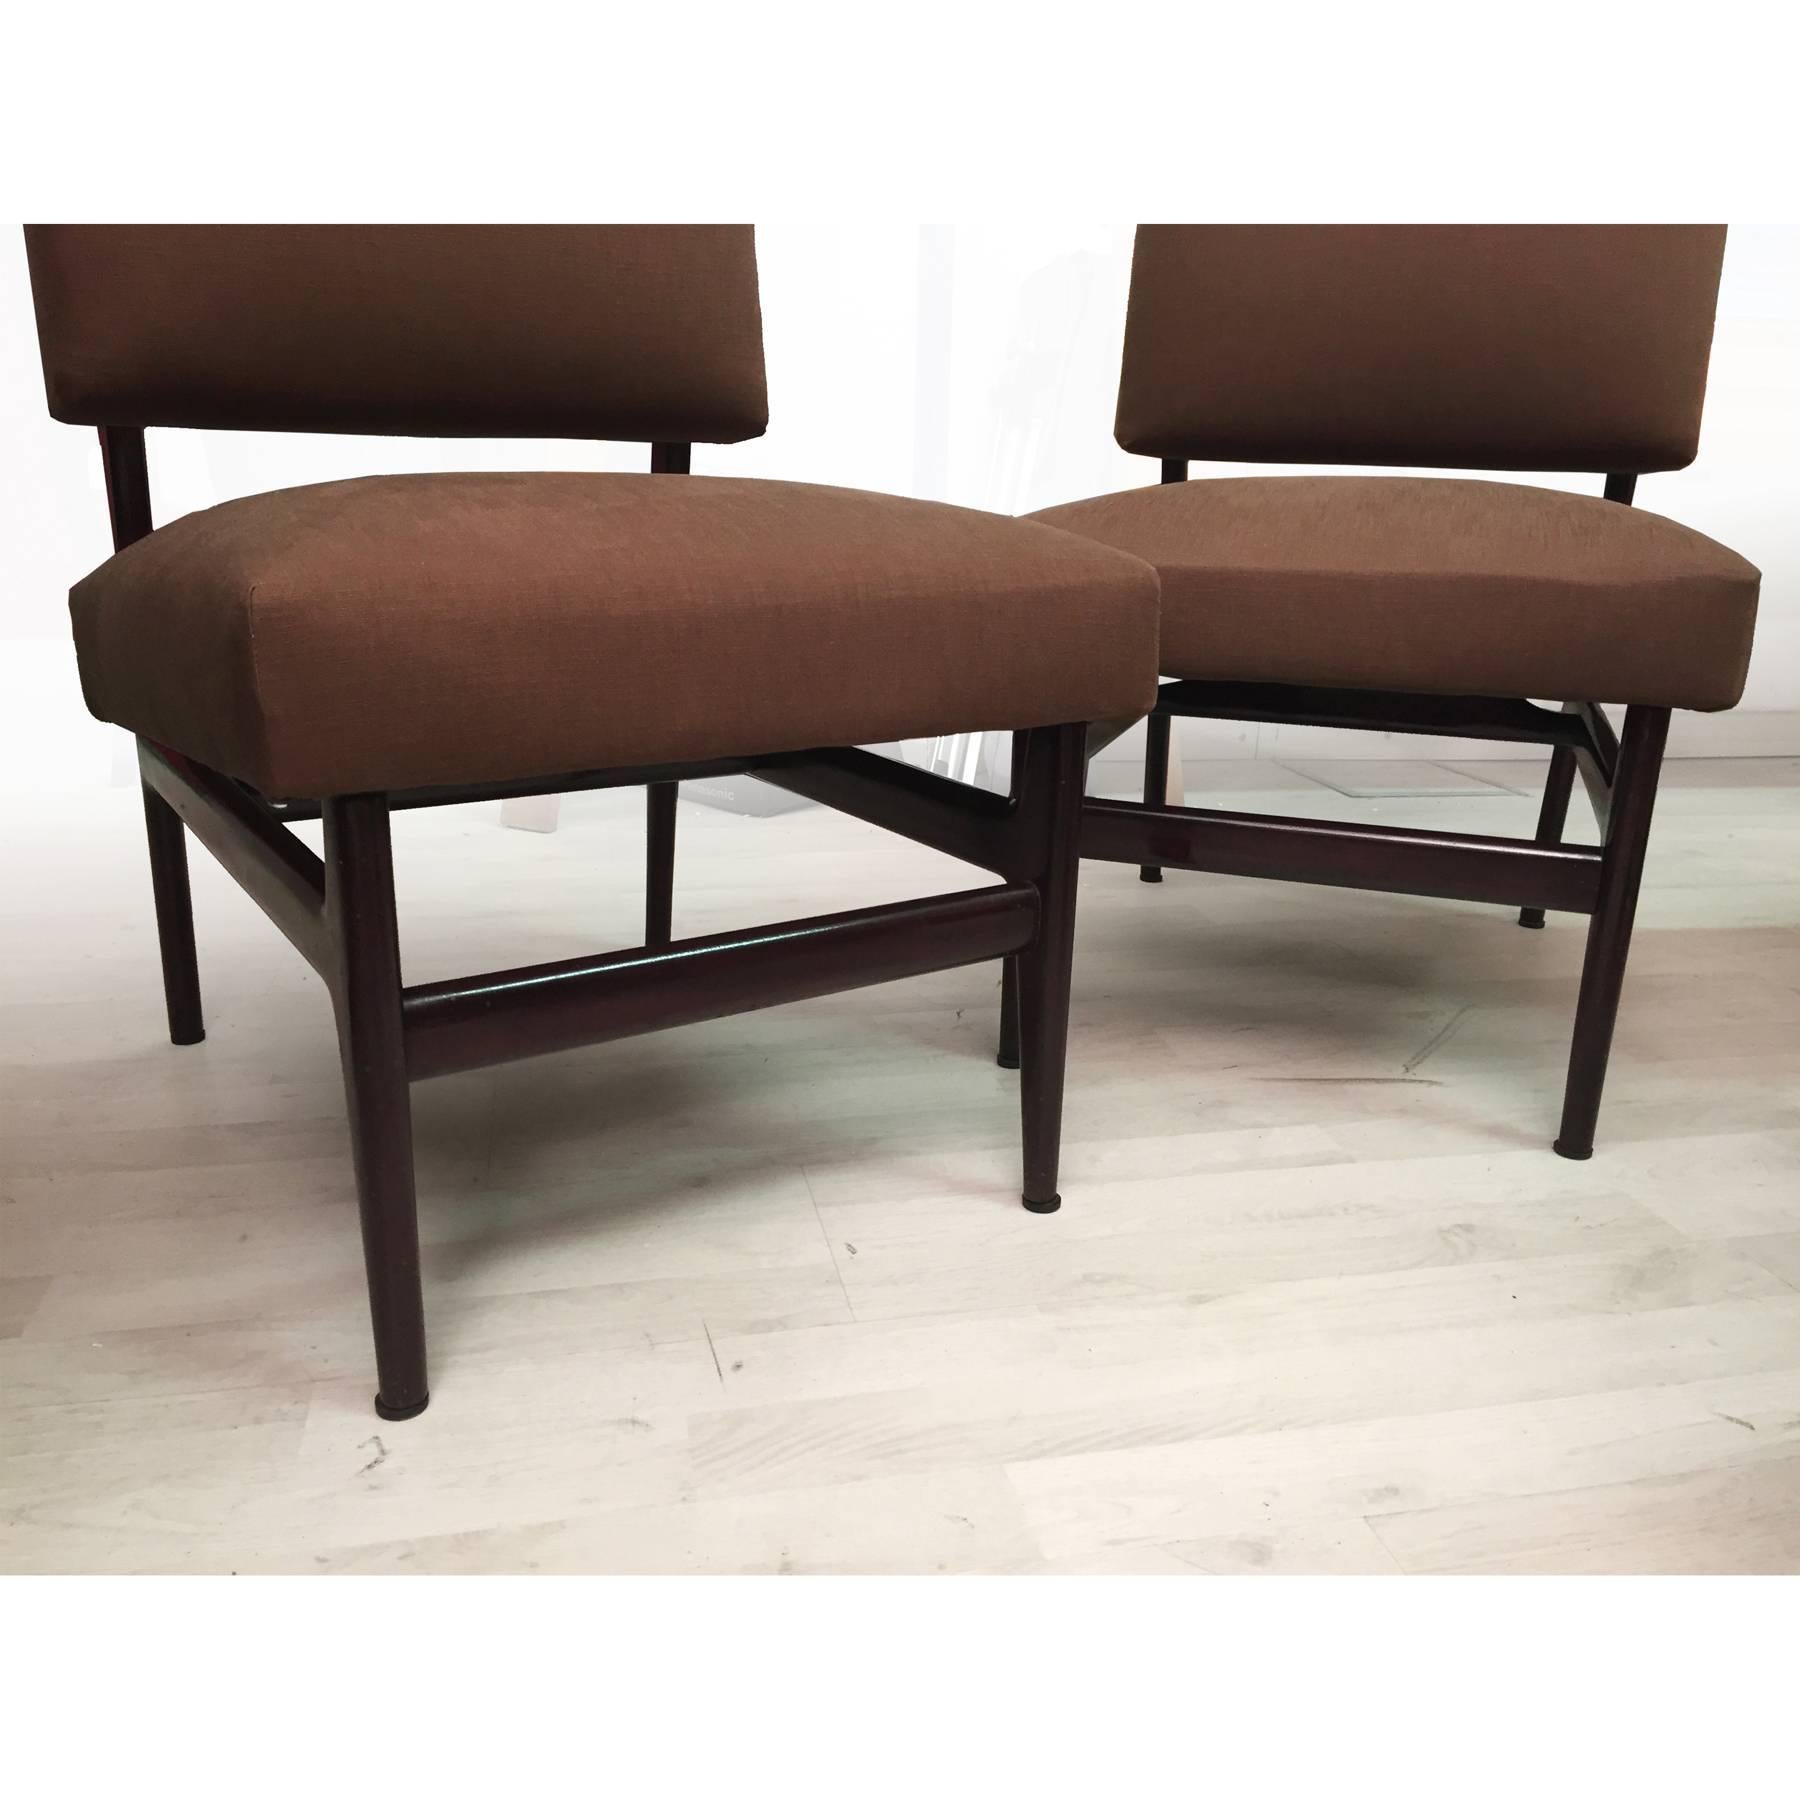 Mid-20th Century Italian Mid-Century Lounge Chairs by Vittorio Dassi, Set of Two, 1950s For Sale